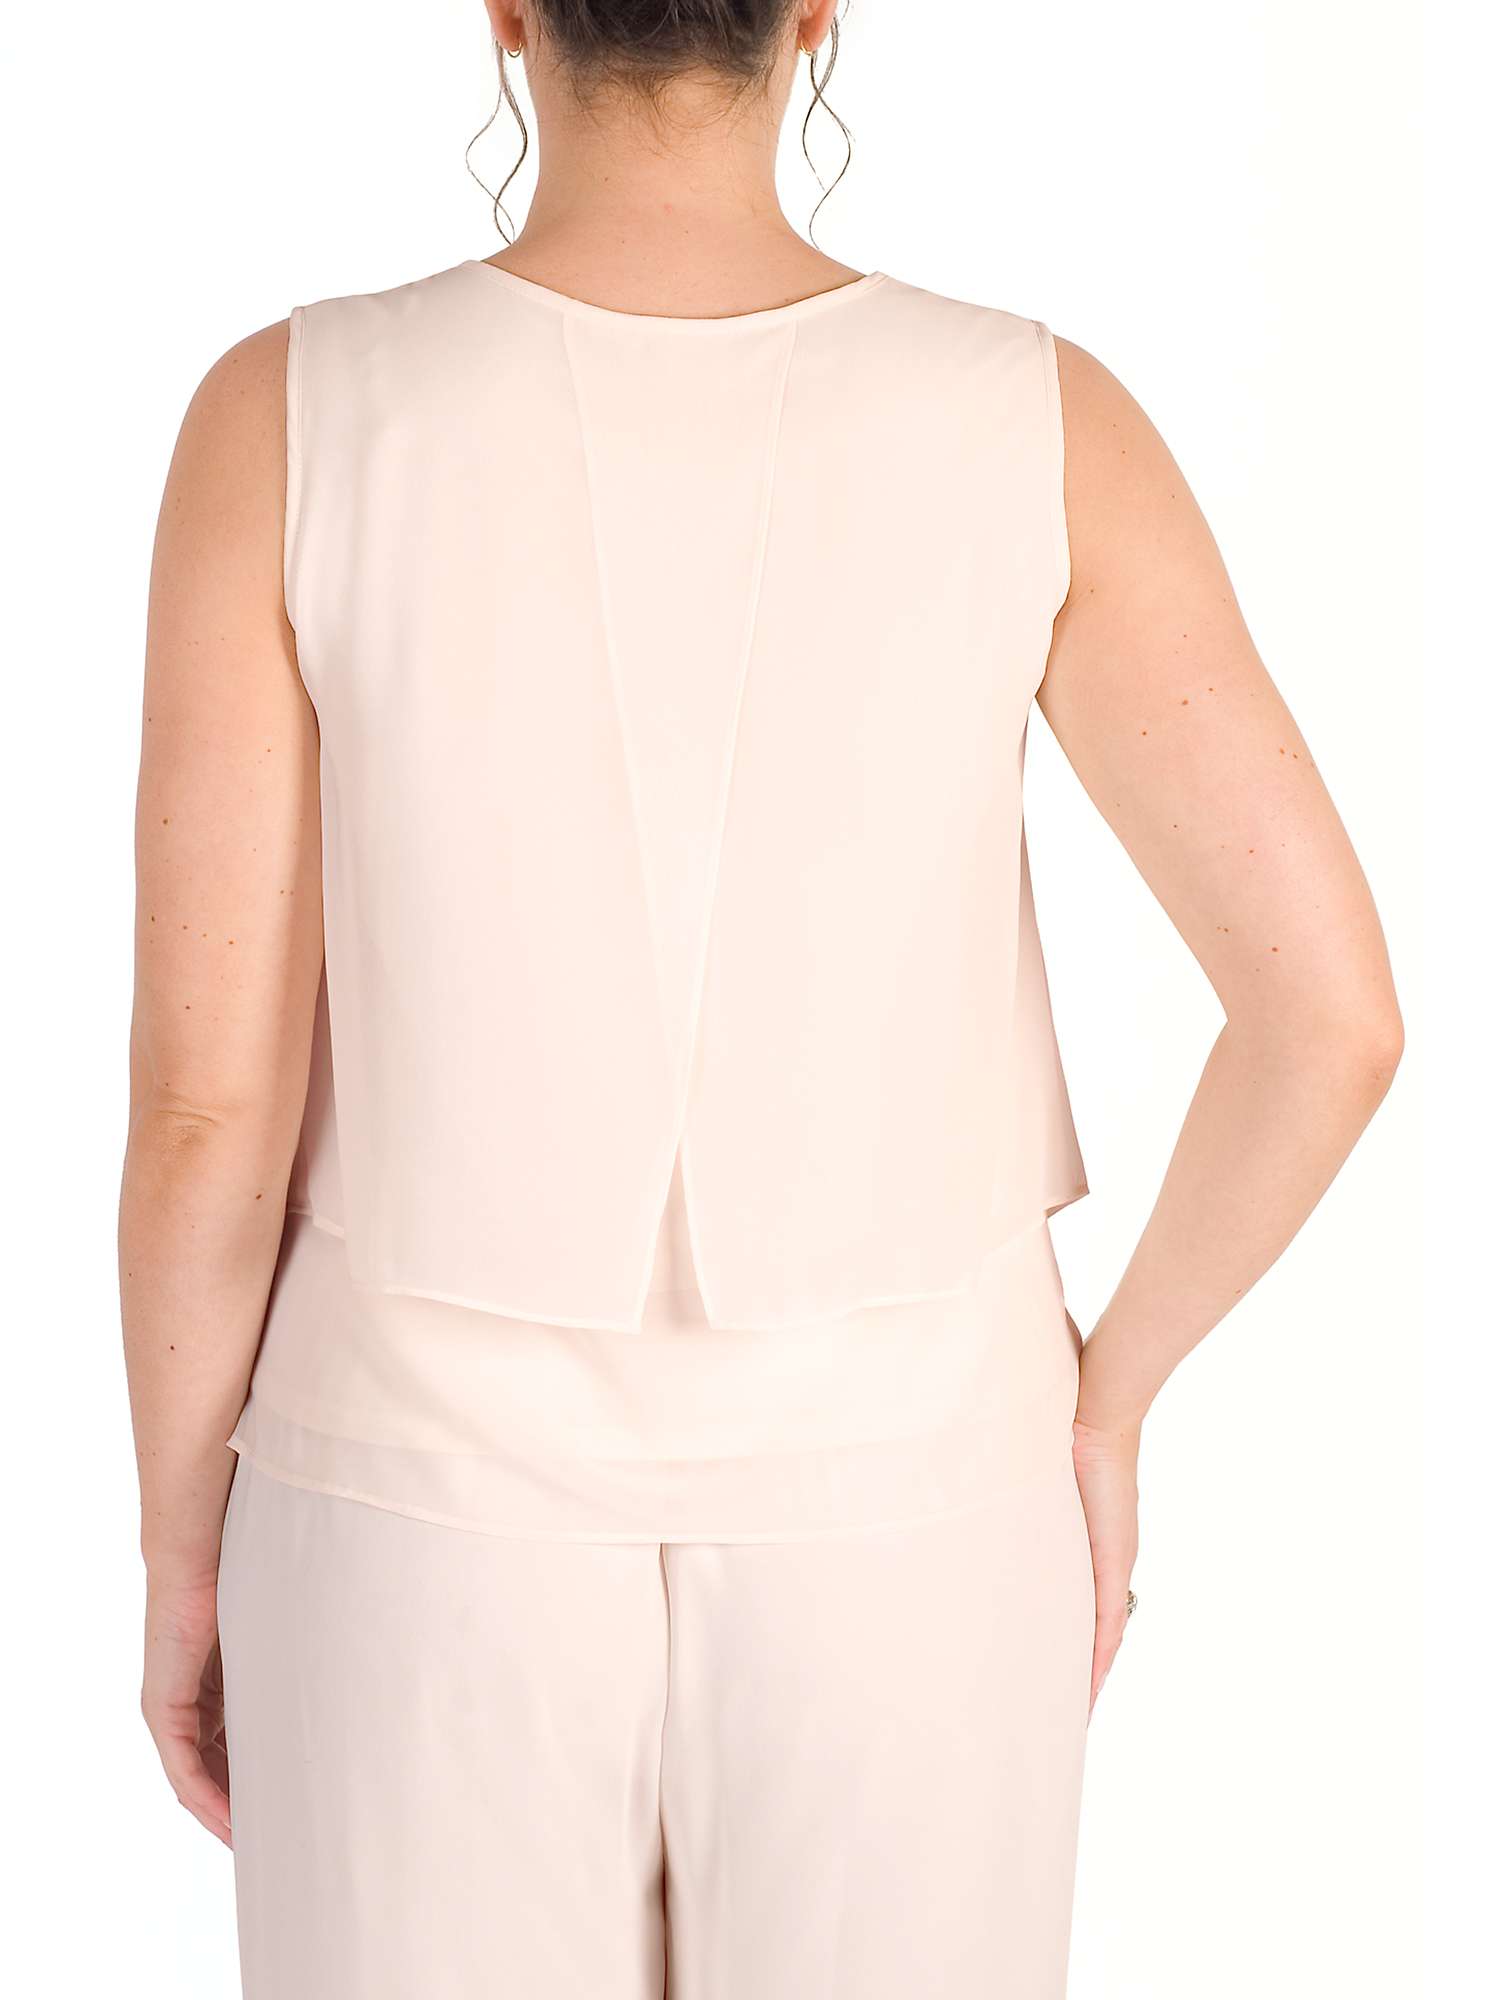 Buy Chesca Wrap Back Layered Chiffon Top Online at johnlewis.com